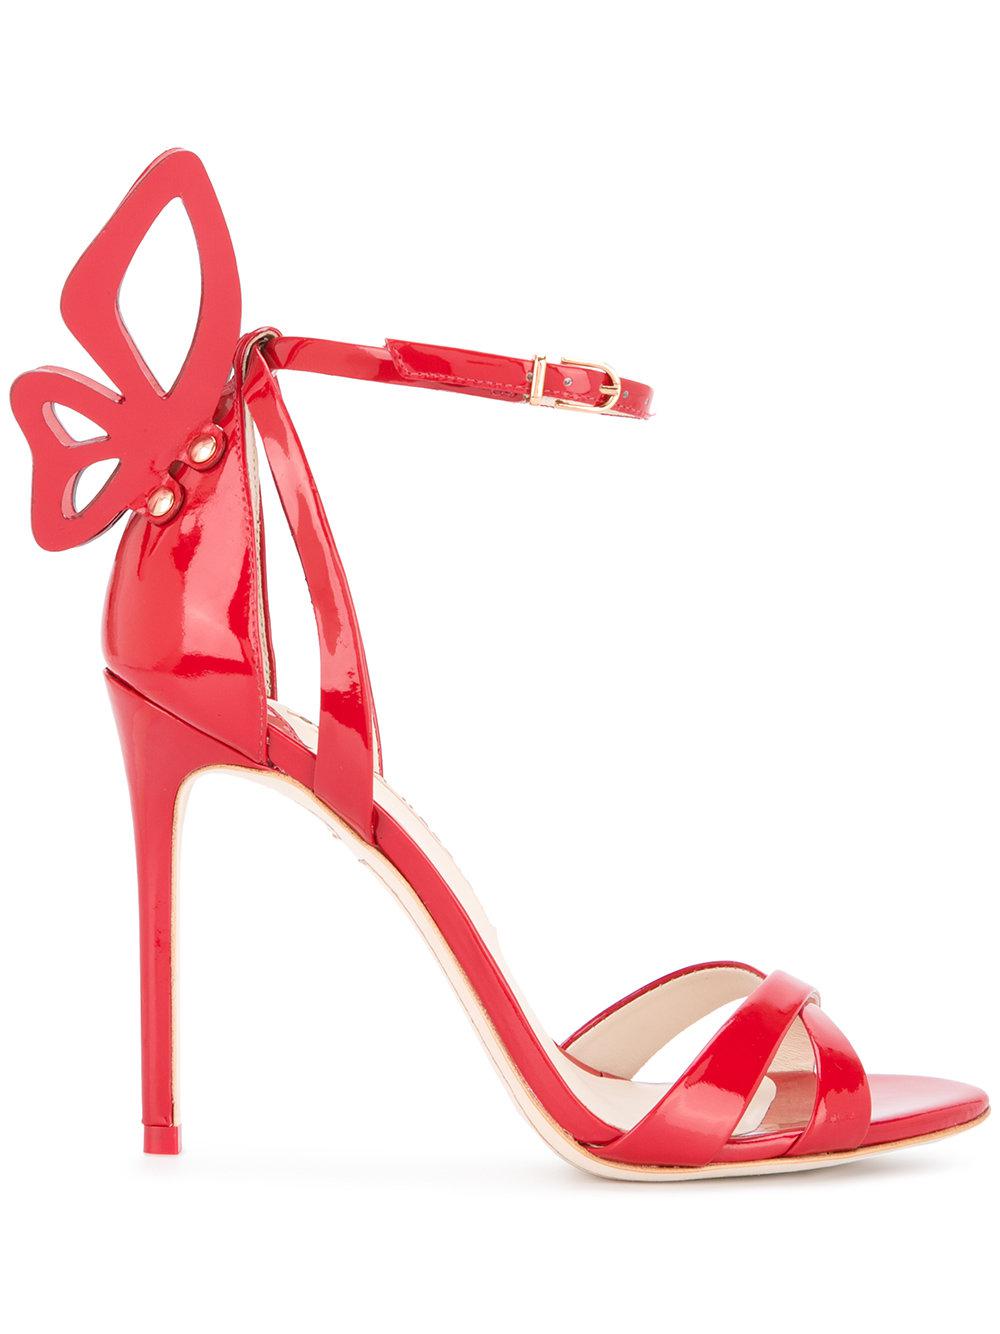 Sophia Webster Leather Chiara Butterfly Sandals in Red | Lyst